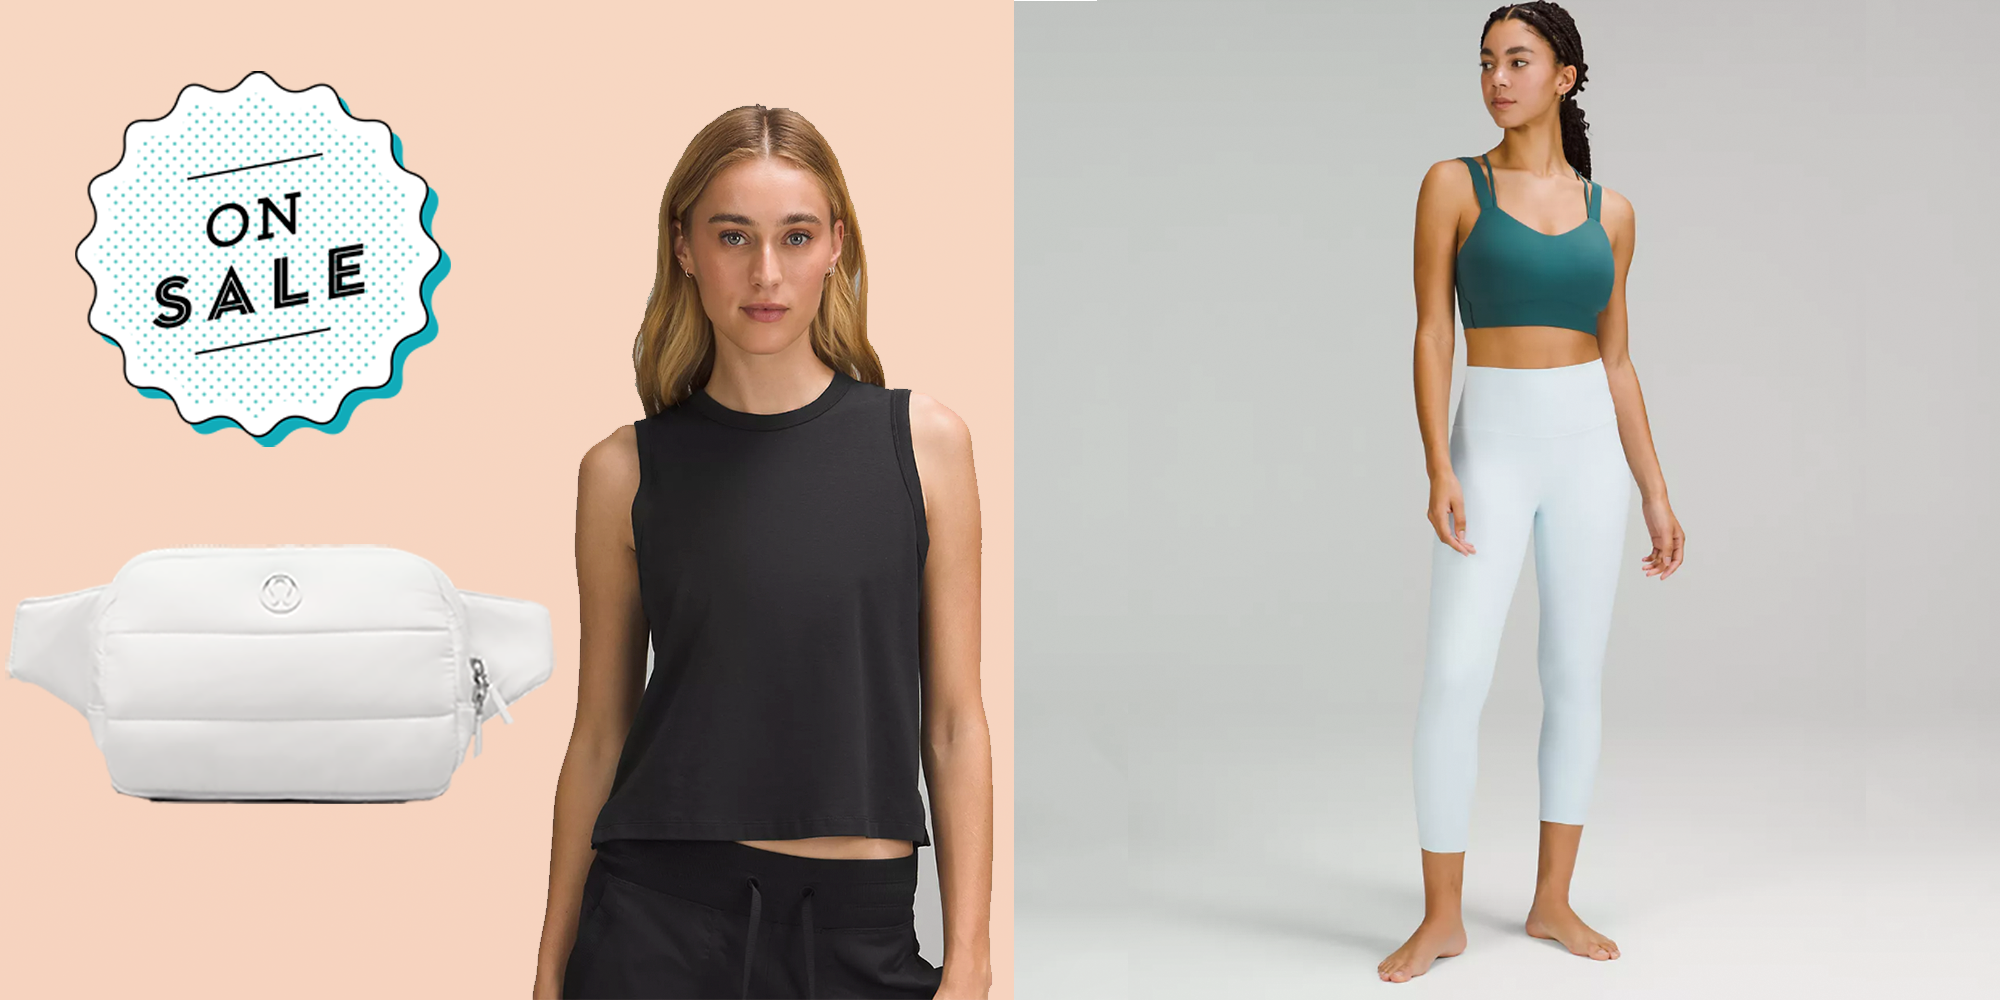 Lululemon's We Made Too Much Section Has Activewear for Everyone